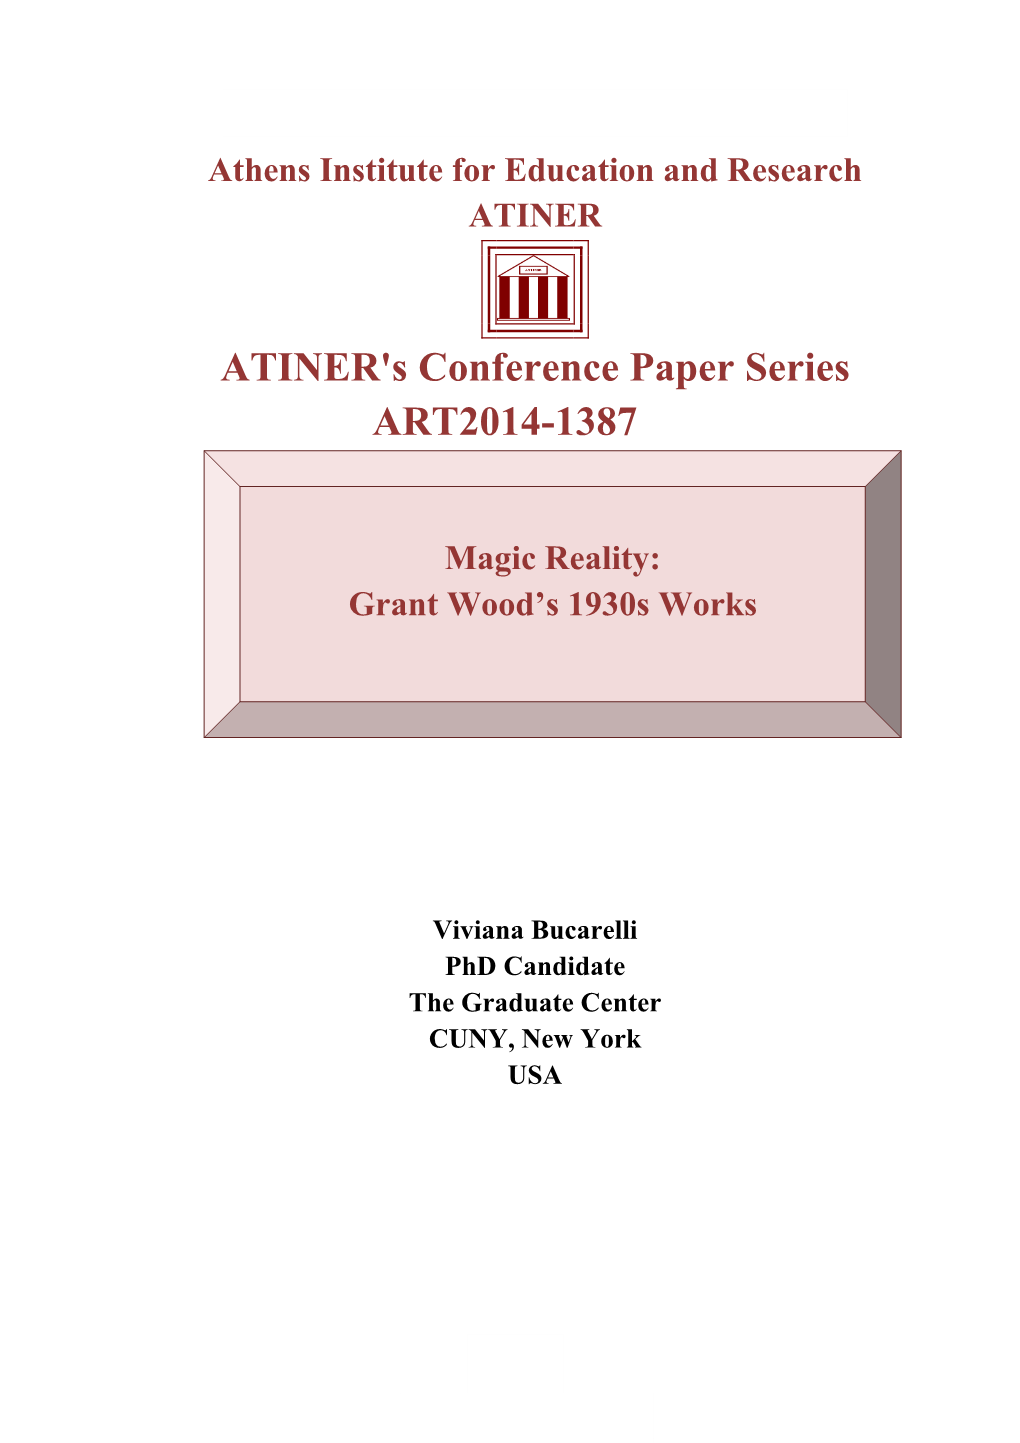 ATINER's Conference Paper Series ART2014-1387